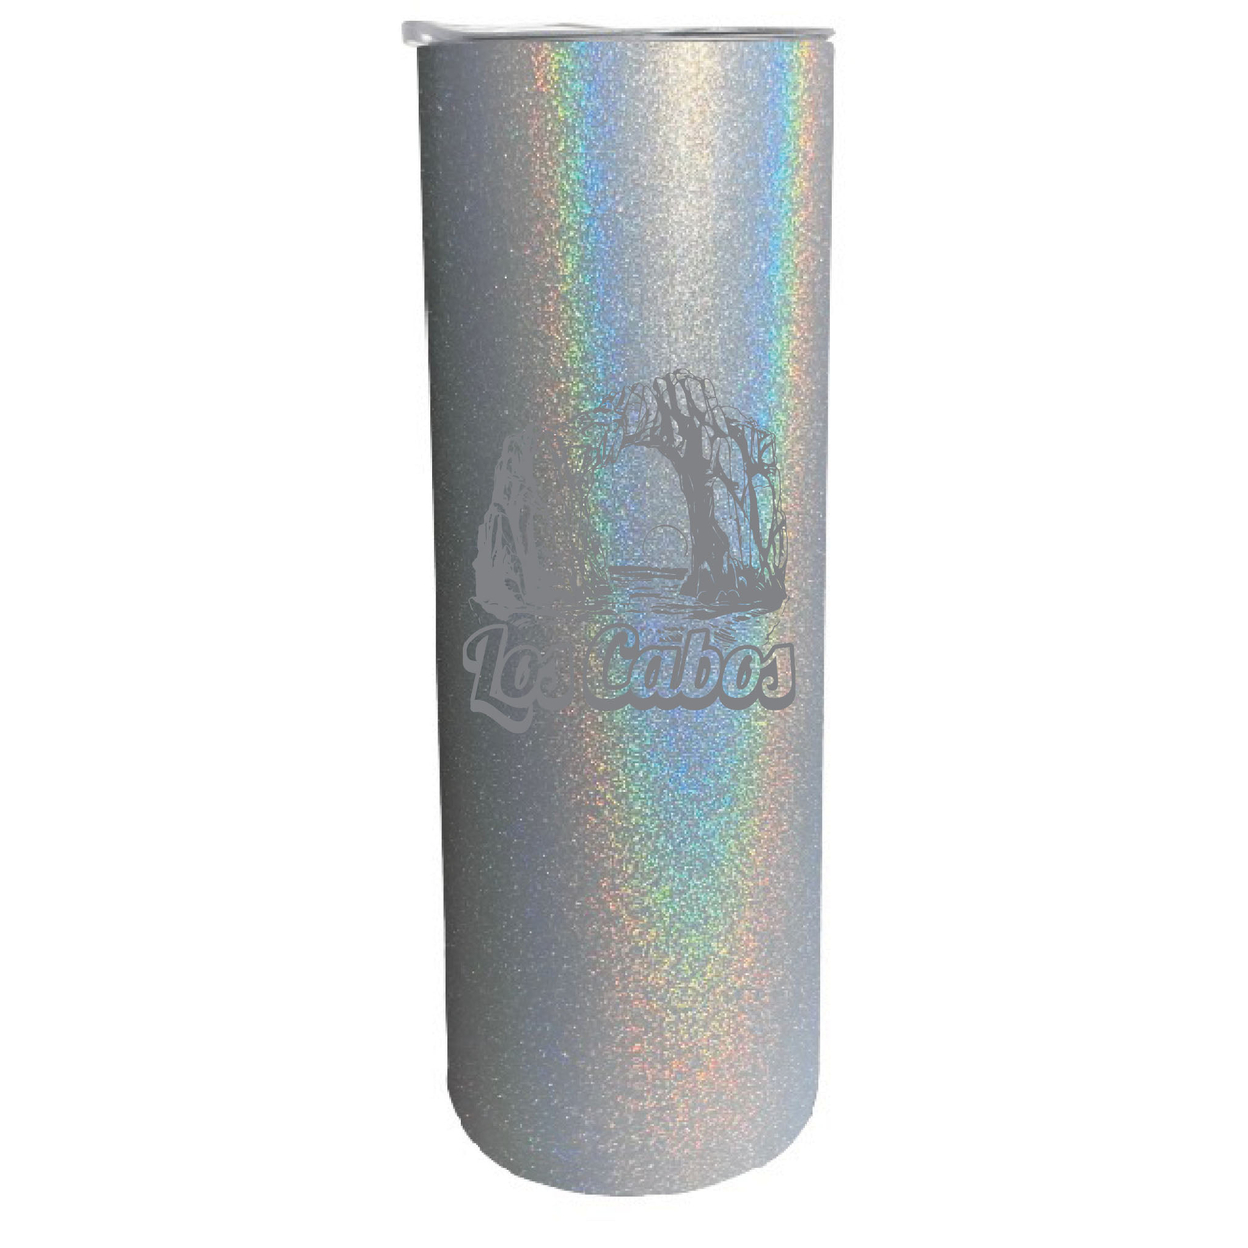 Los Cabos Mexico Souvenir 20 Oz Engraved Insulated Stainless Steel Skinny Tumbler - Gray Glitter,,4-Pack